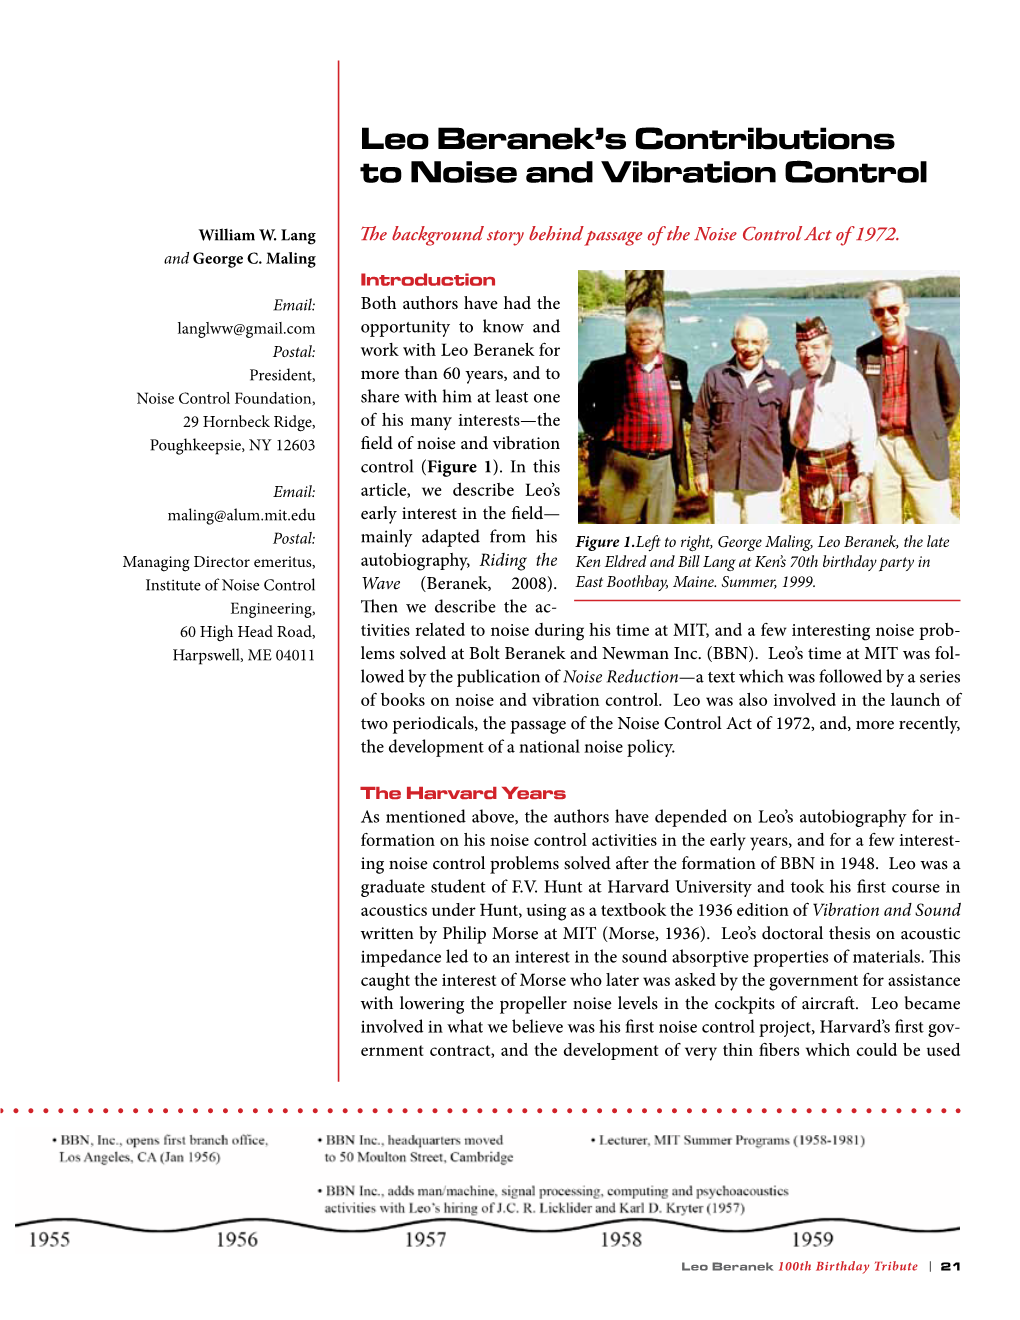 Leo Beranek's Contributions to Noise and Vibration Control